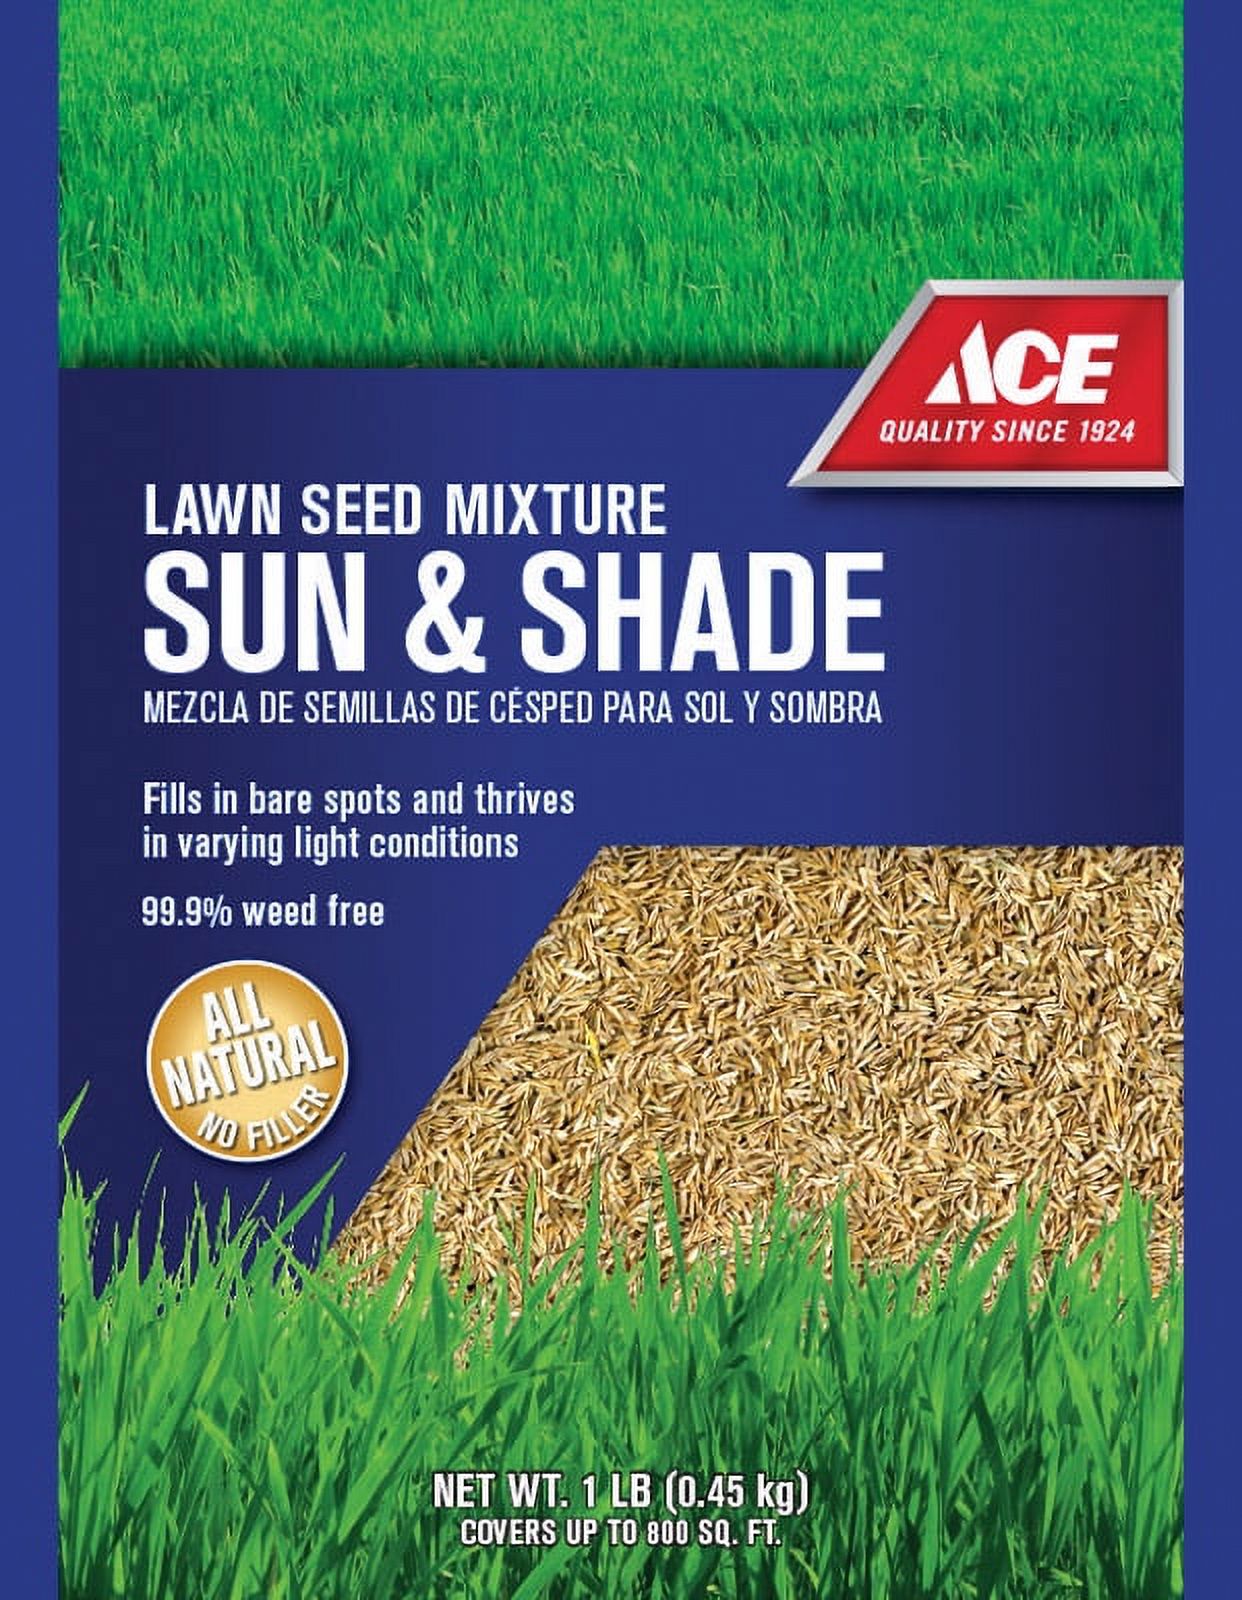 Ace Mixed Full Shade Grass Seed 1 lb - image 1 of 1